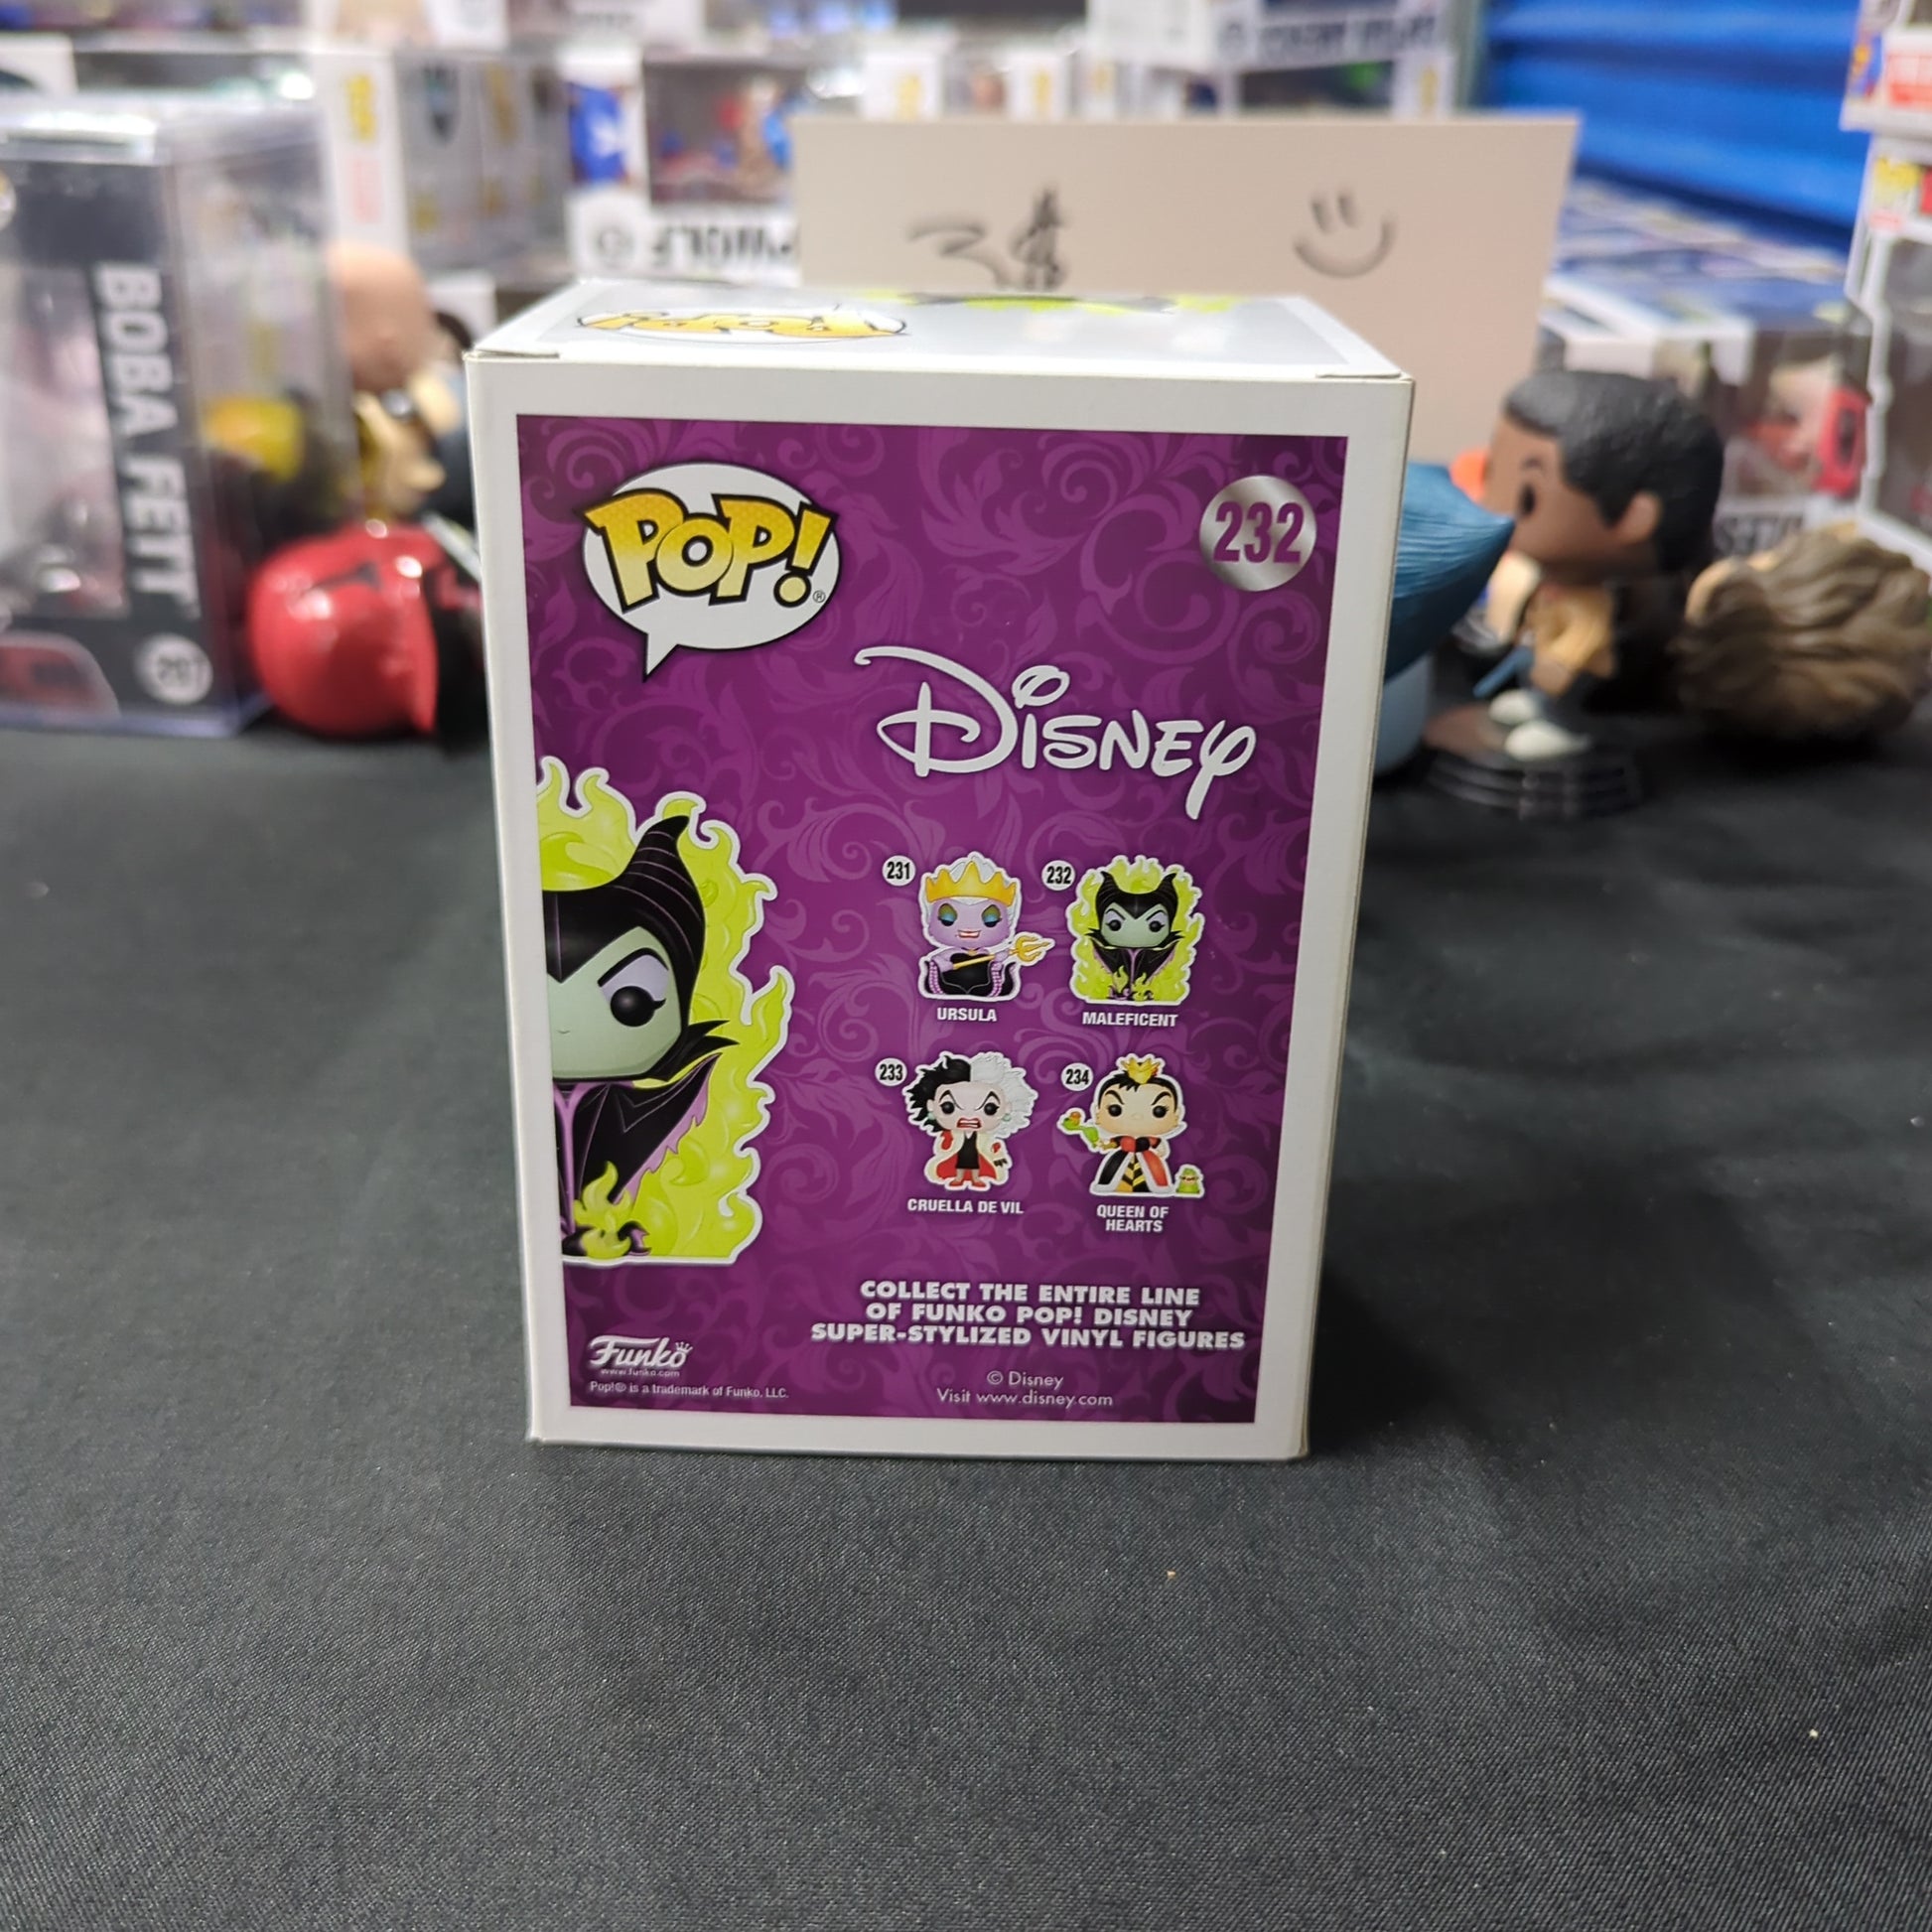 Sleeping Beauty - Maleficent with Flames Pop! Vinyl 232 chase glow in dark FRENLY BRICKS - Open 7 Days